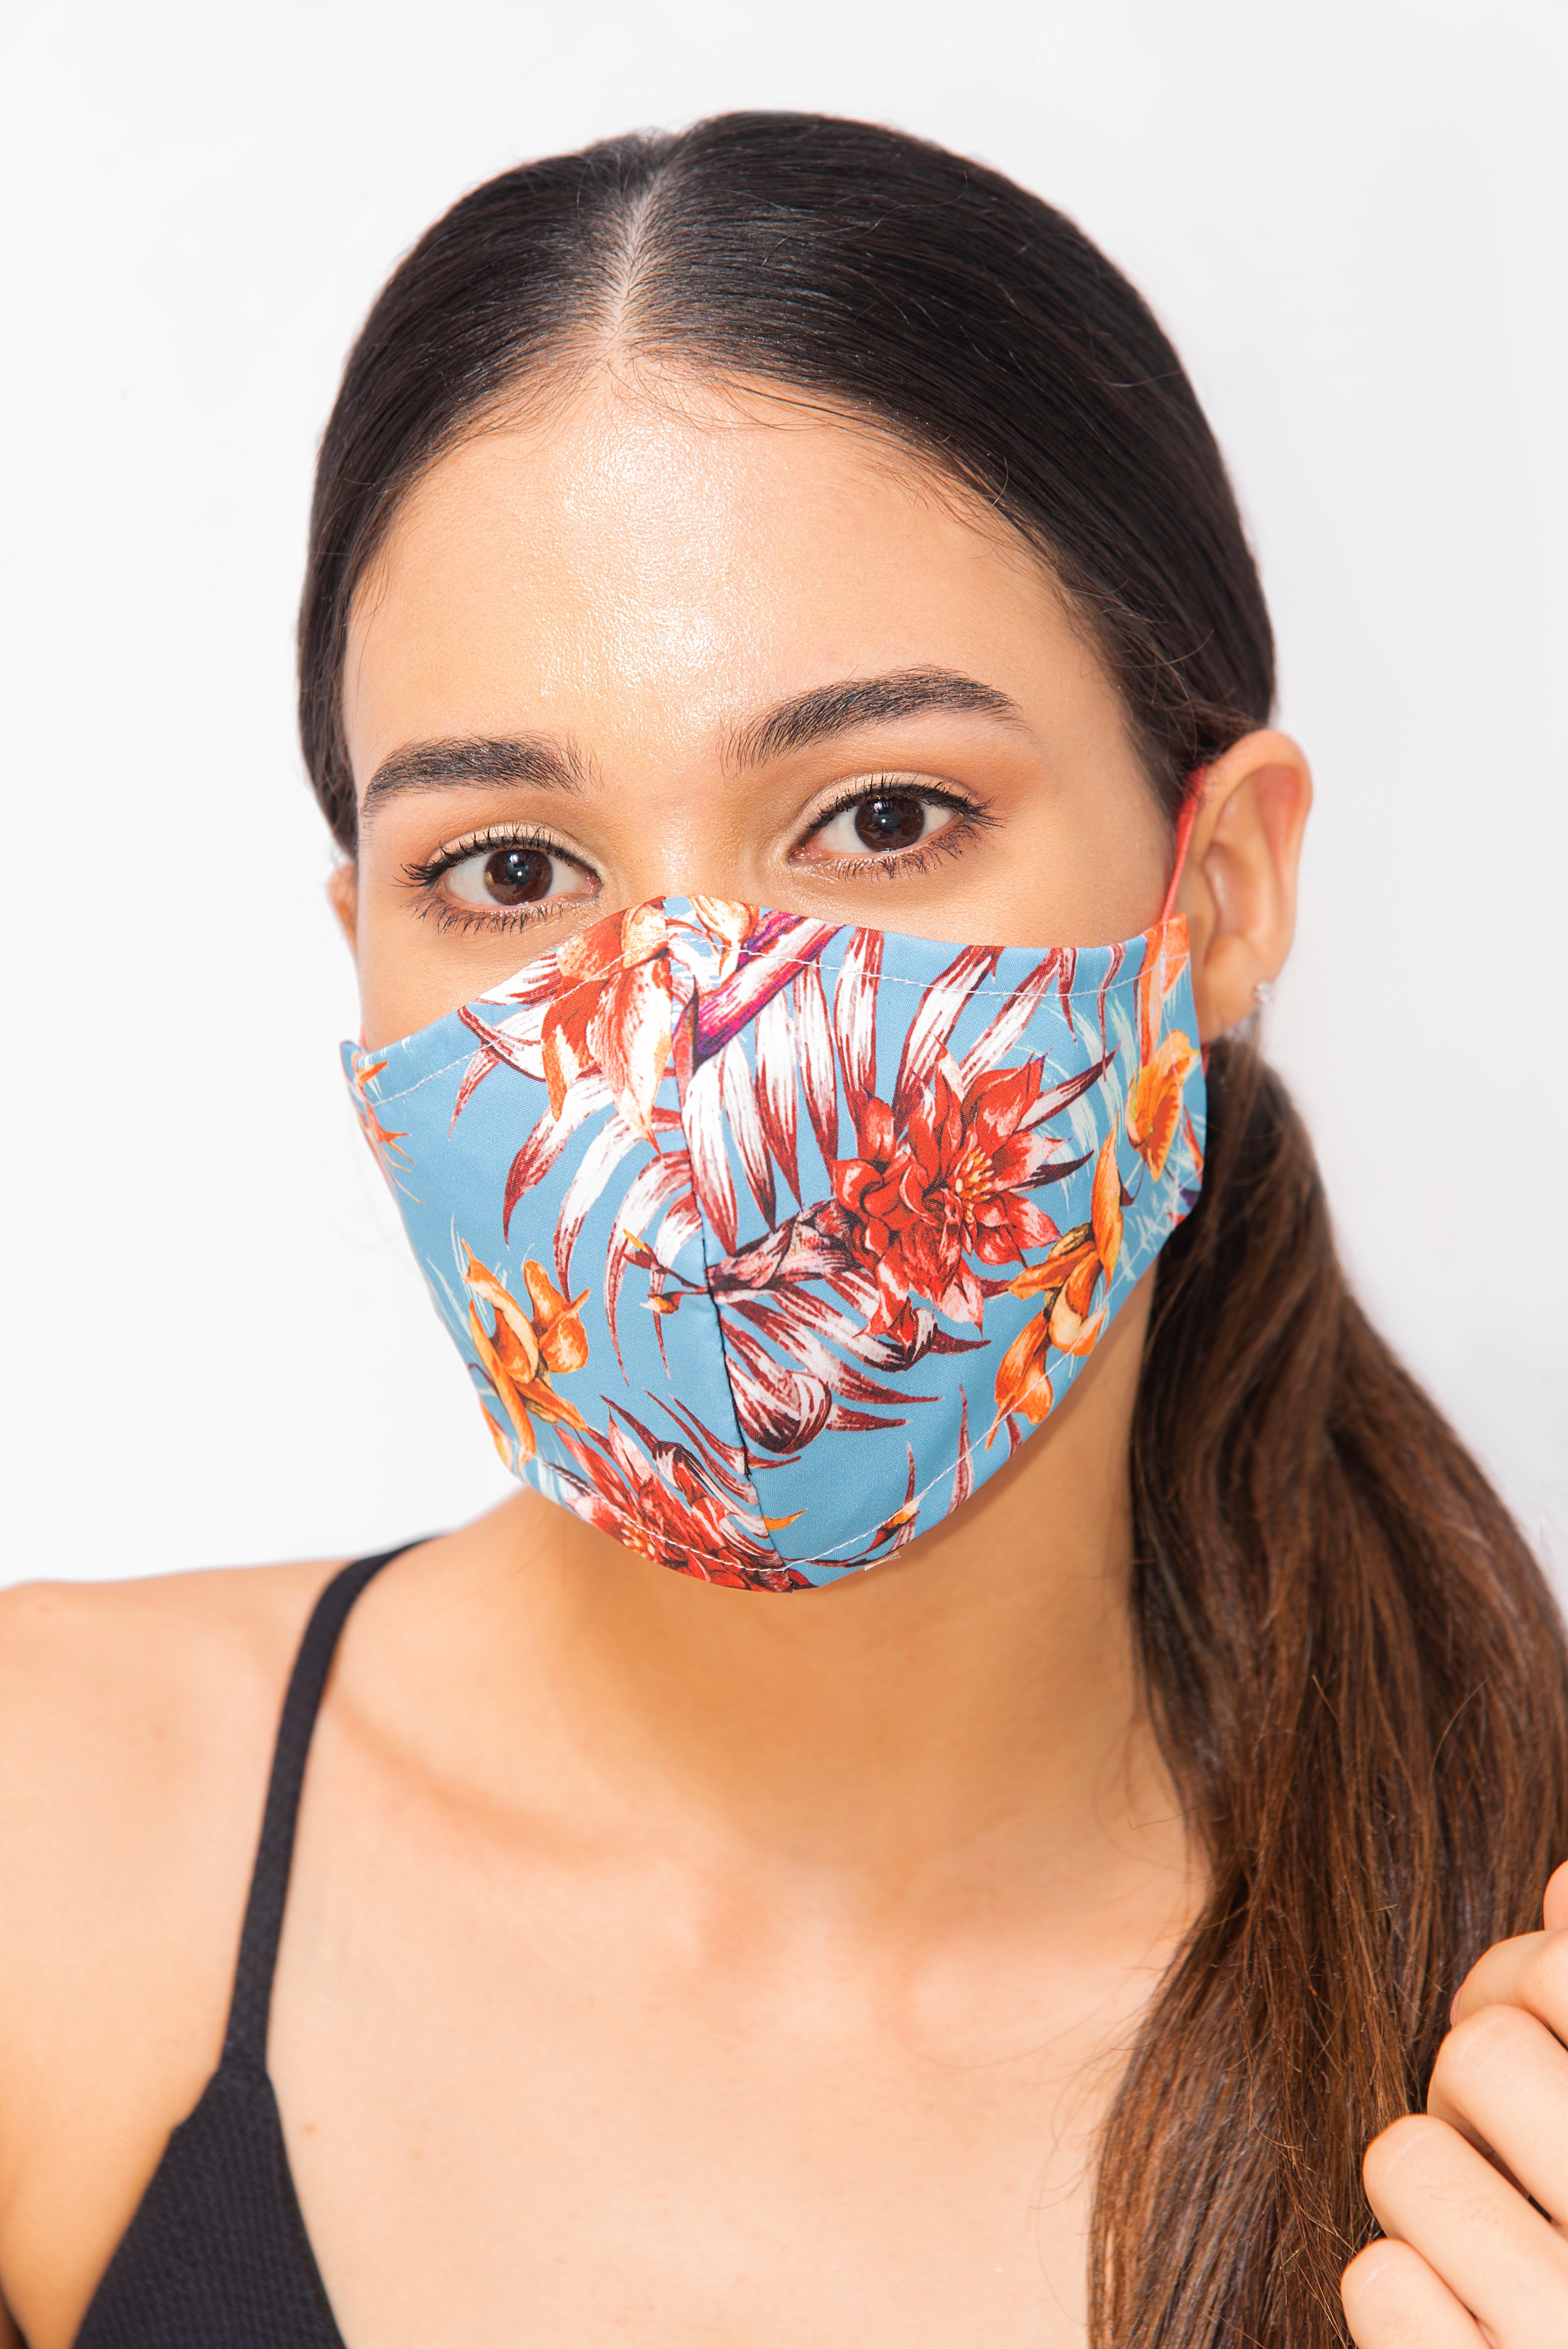 Where to Buy Luxury Face Masks Made by Popular Designers